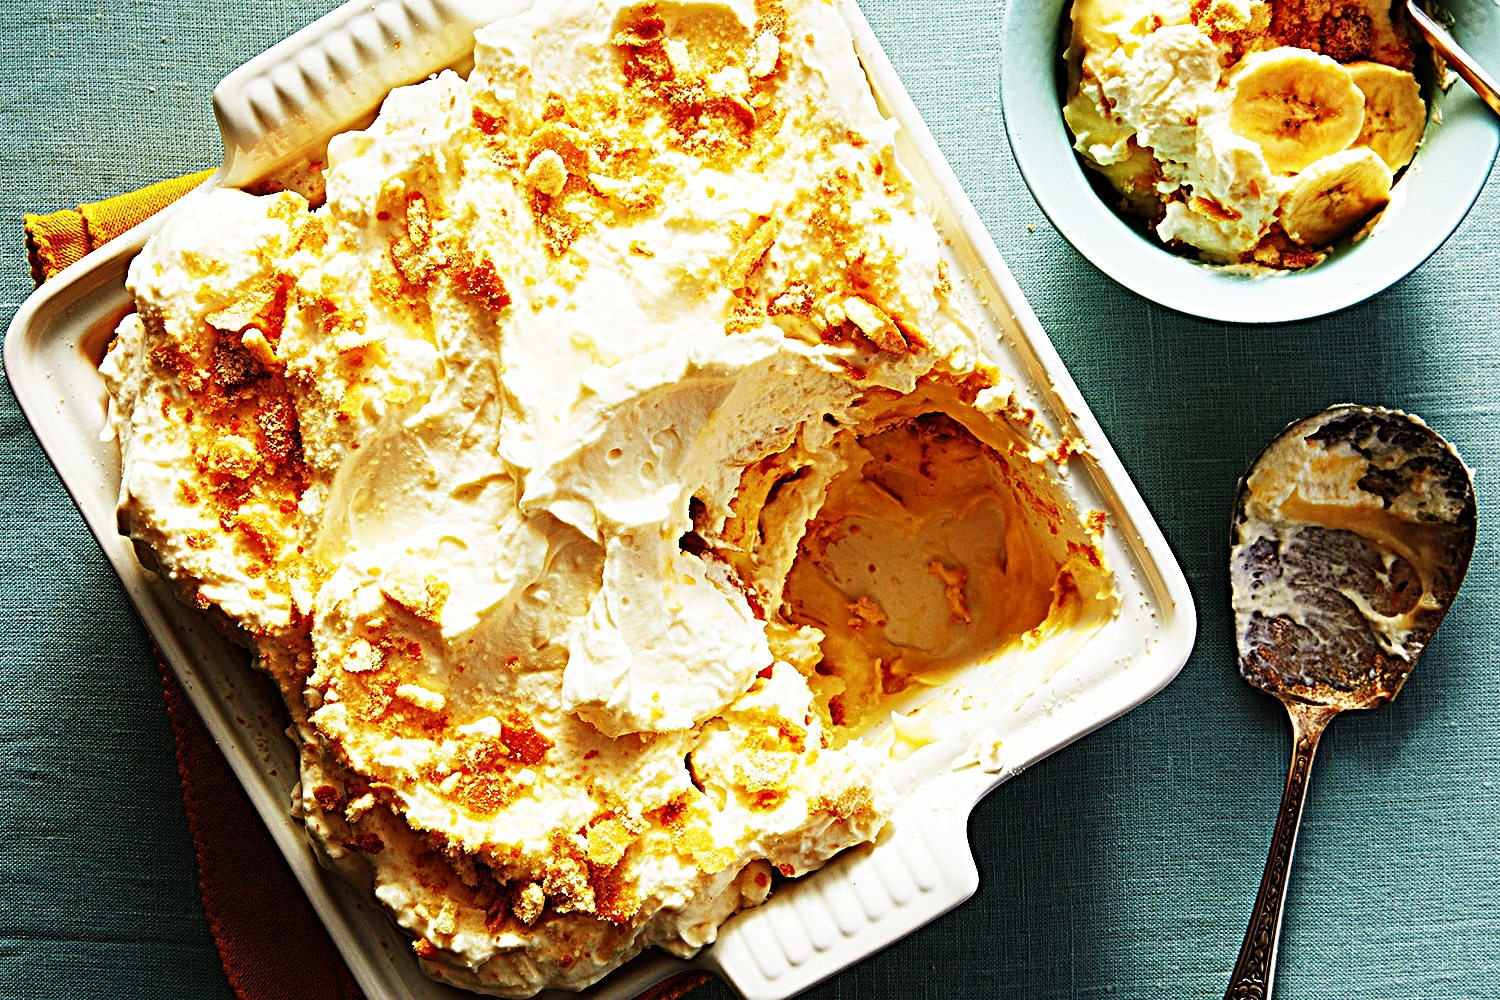 Stupid-Easy Recipe for One-Bowl Banana Pudding with Coconut Whipped Cream (#1 Top-Rated)